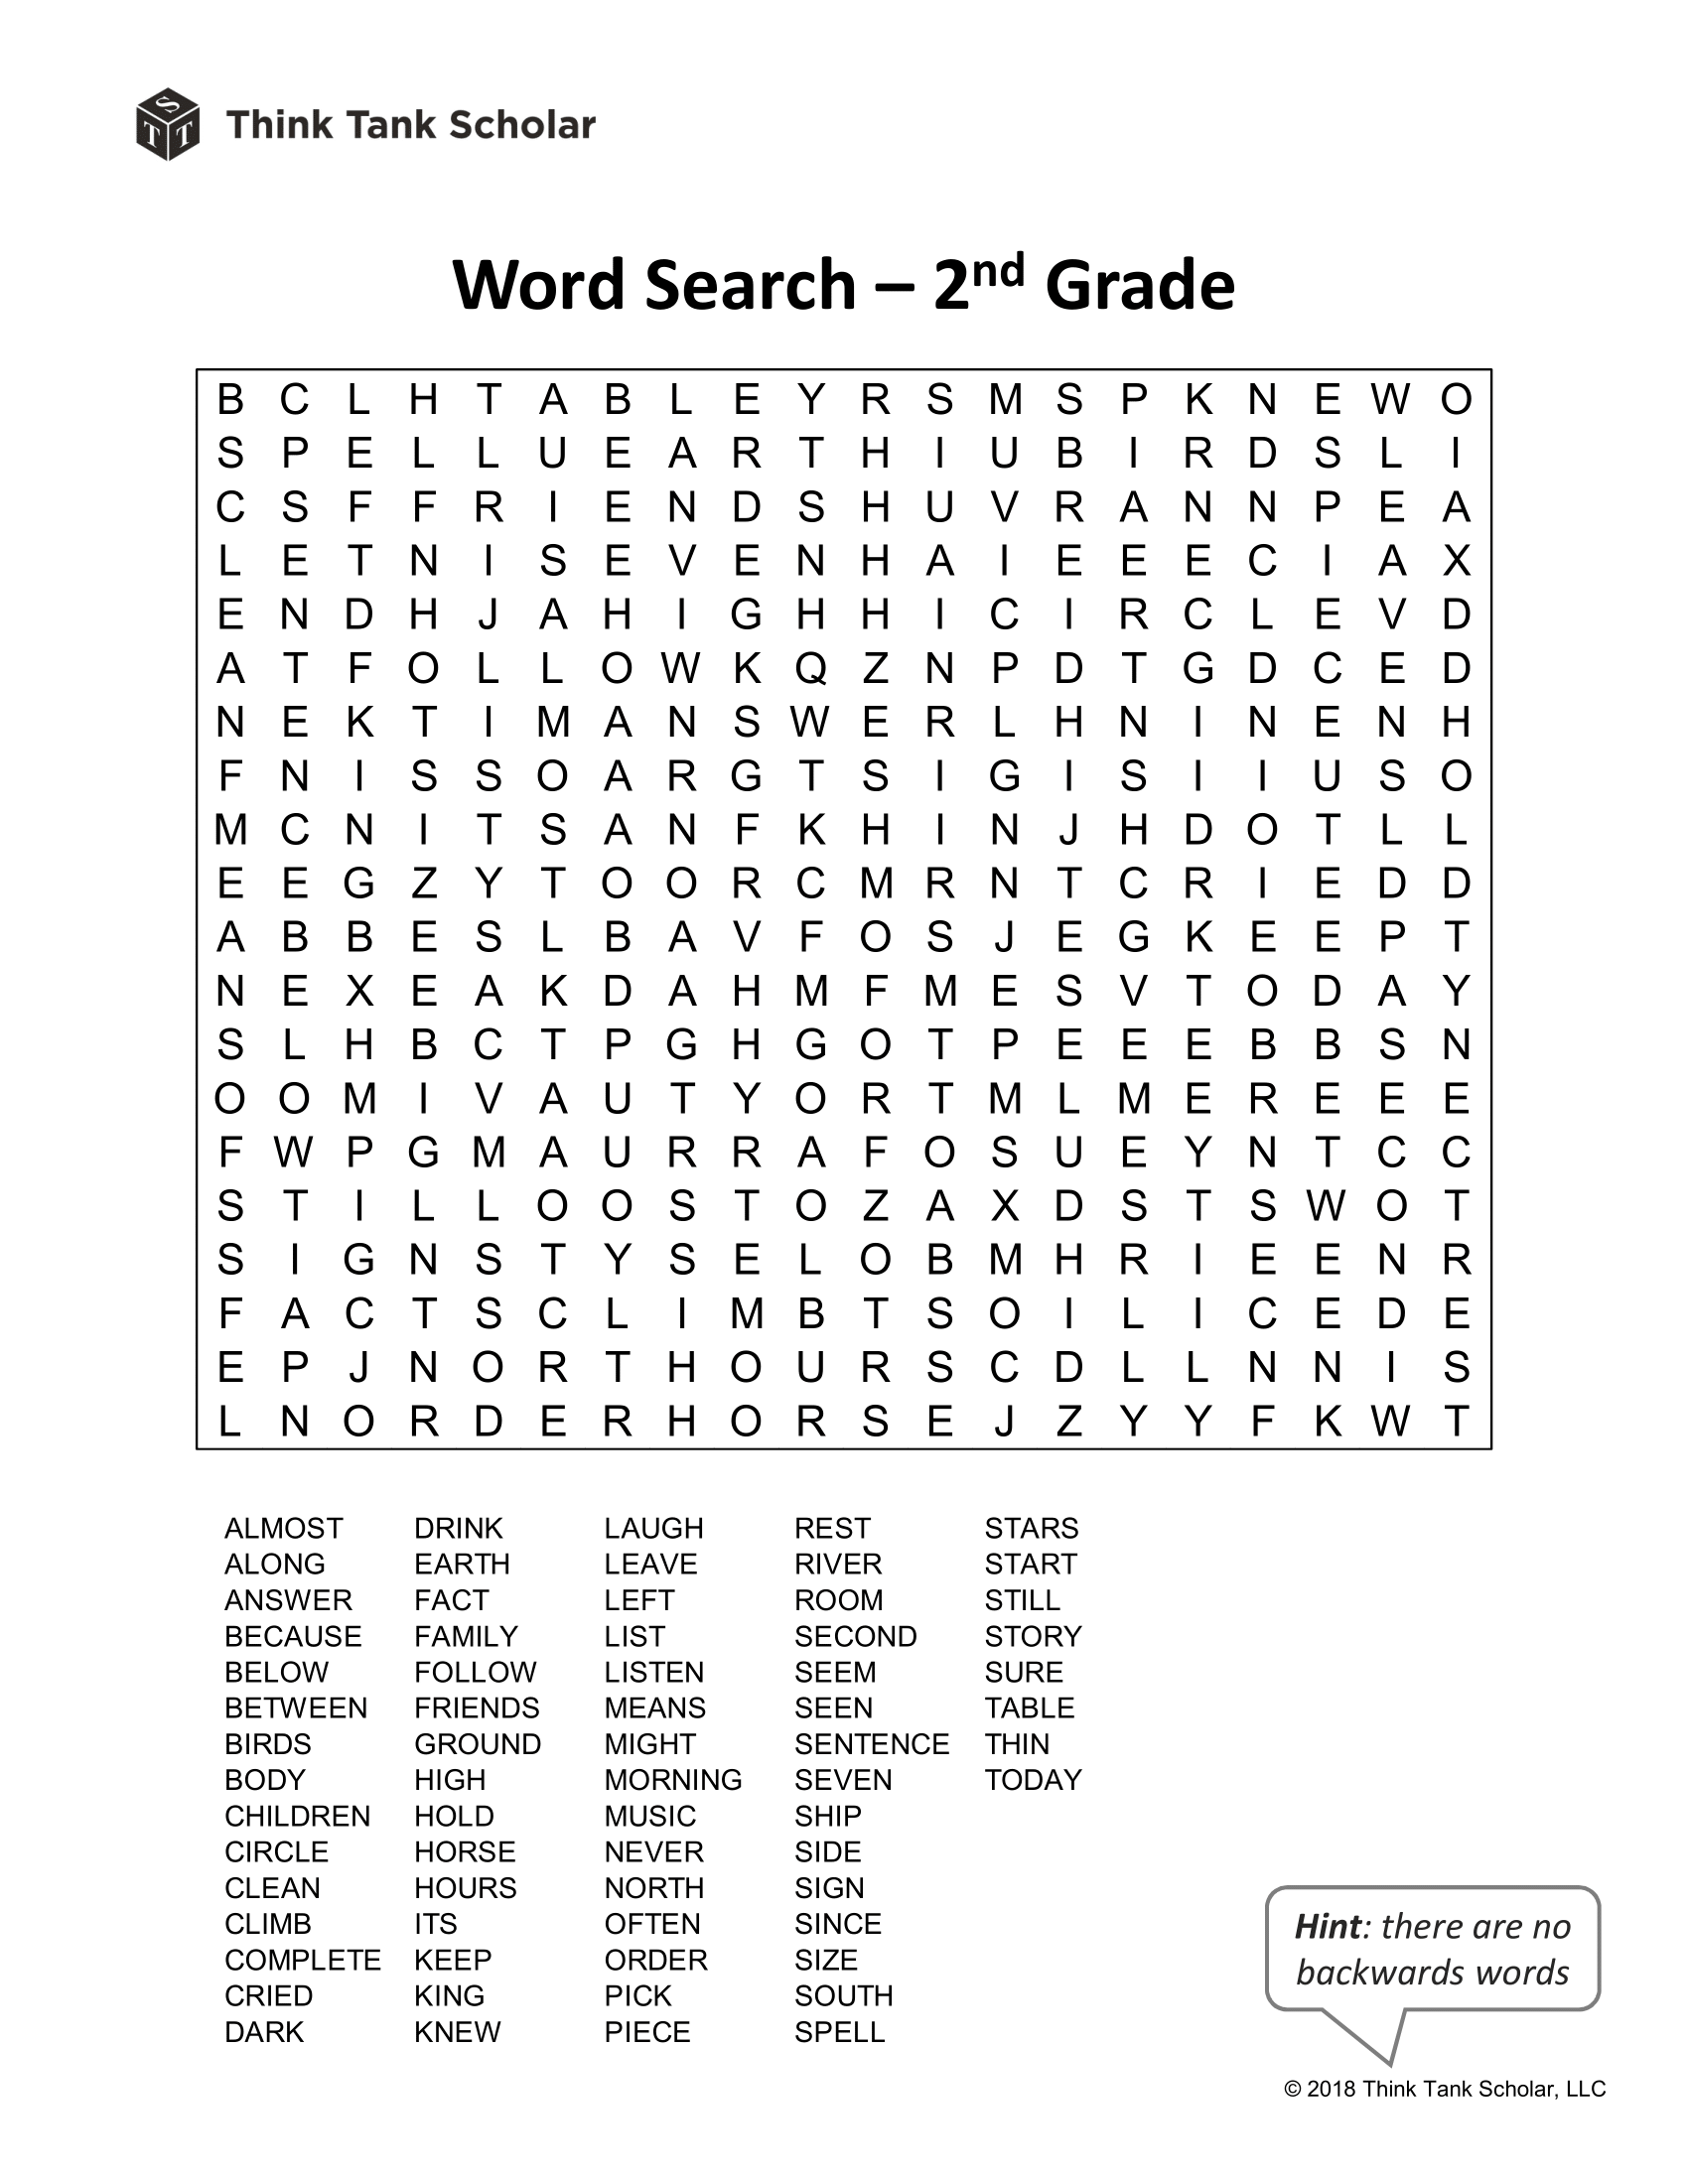 Sight Words Worksheet (FREE) Word Search 11nd Grade Printable Within 2nd Grade Sight Words Worksheet